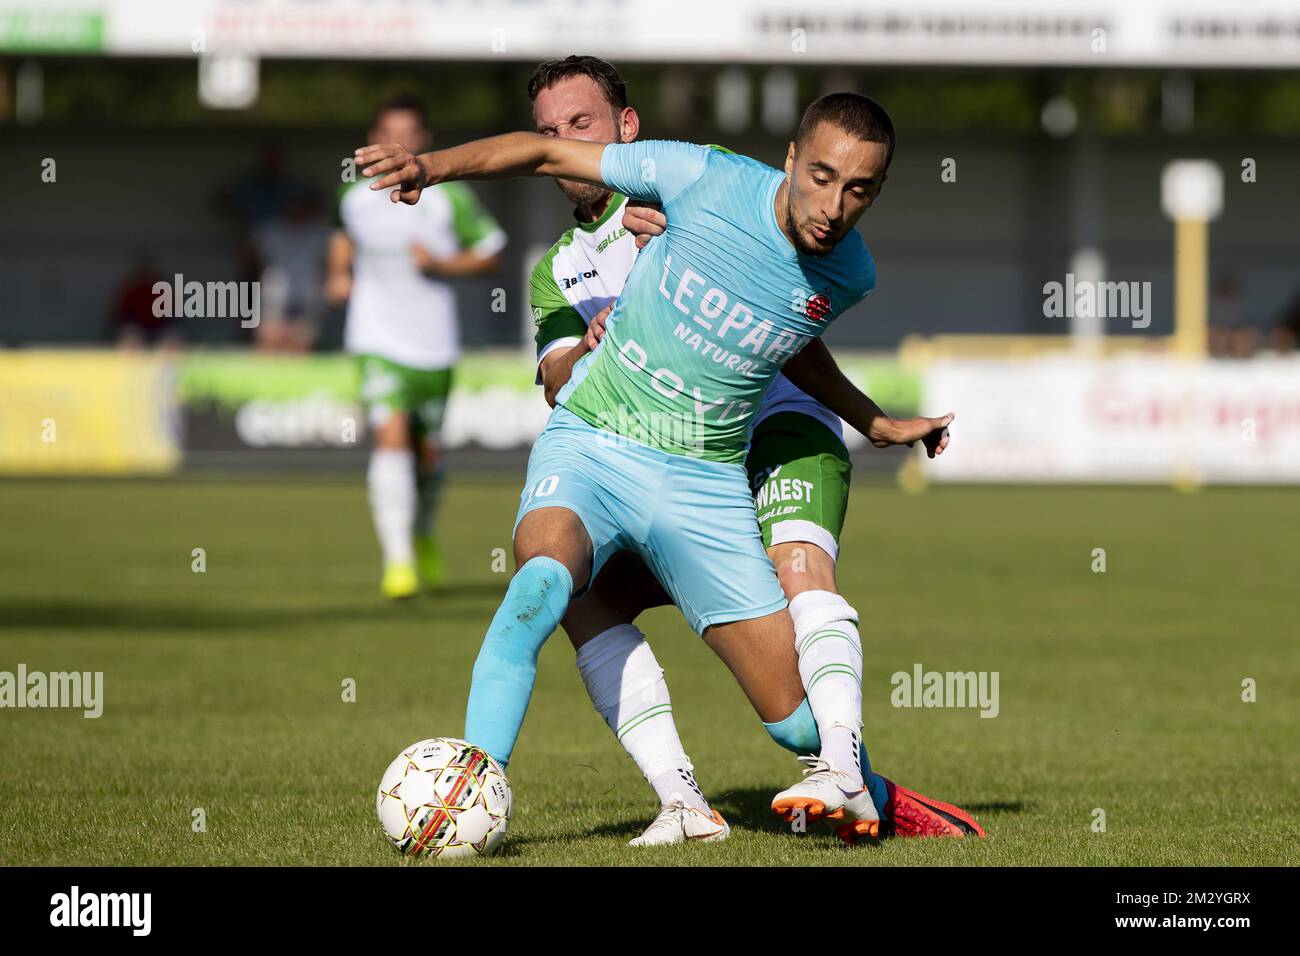 Dessel's Kevin Janssens and Virton's Mehdi Lazaar fight for the ball during a soccer game between Dessel Sport (First amateur division) and Royal Excelsior Virton (1b 2nd division), Saturday 24 August 2019 in Dessel, in the fifth round of the 'Croky Cup' Belgian cup. BELGA PHOTO KRISTOF VAN ACCOM Stock Photo